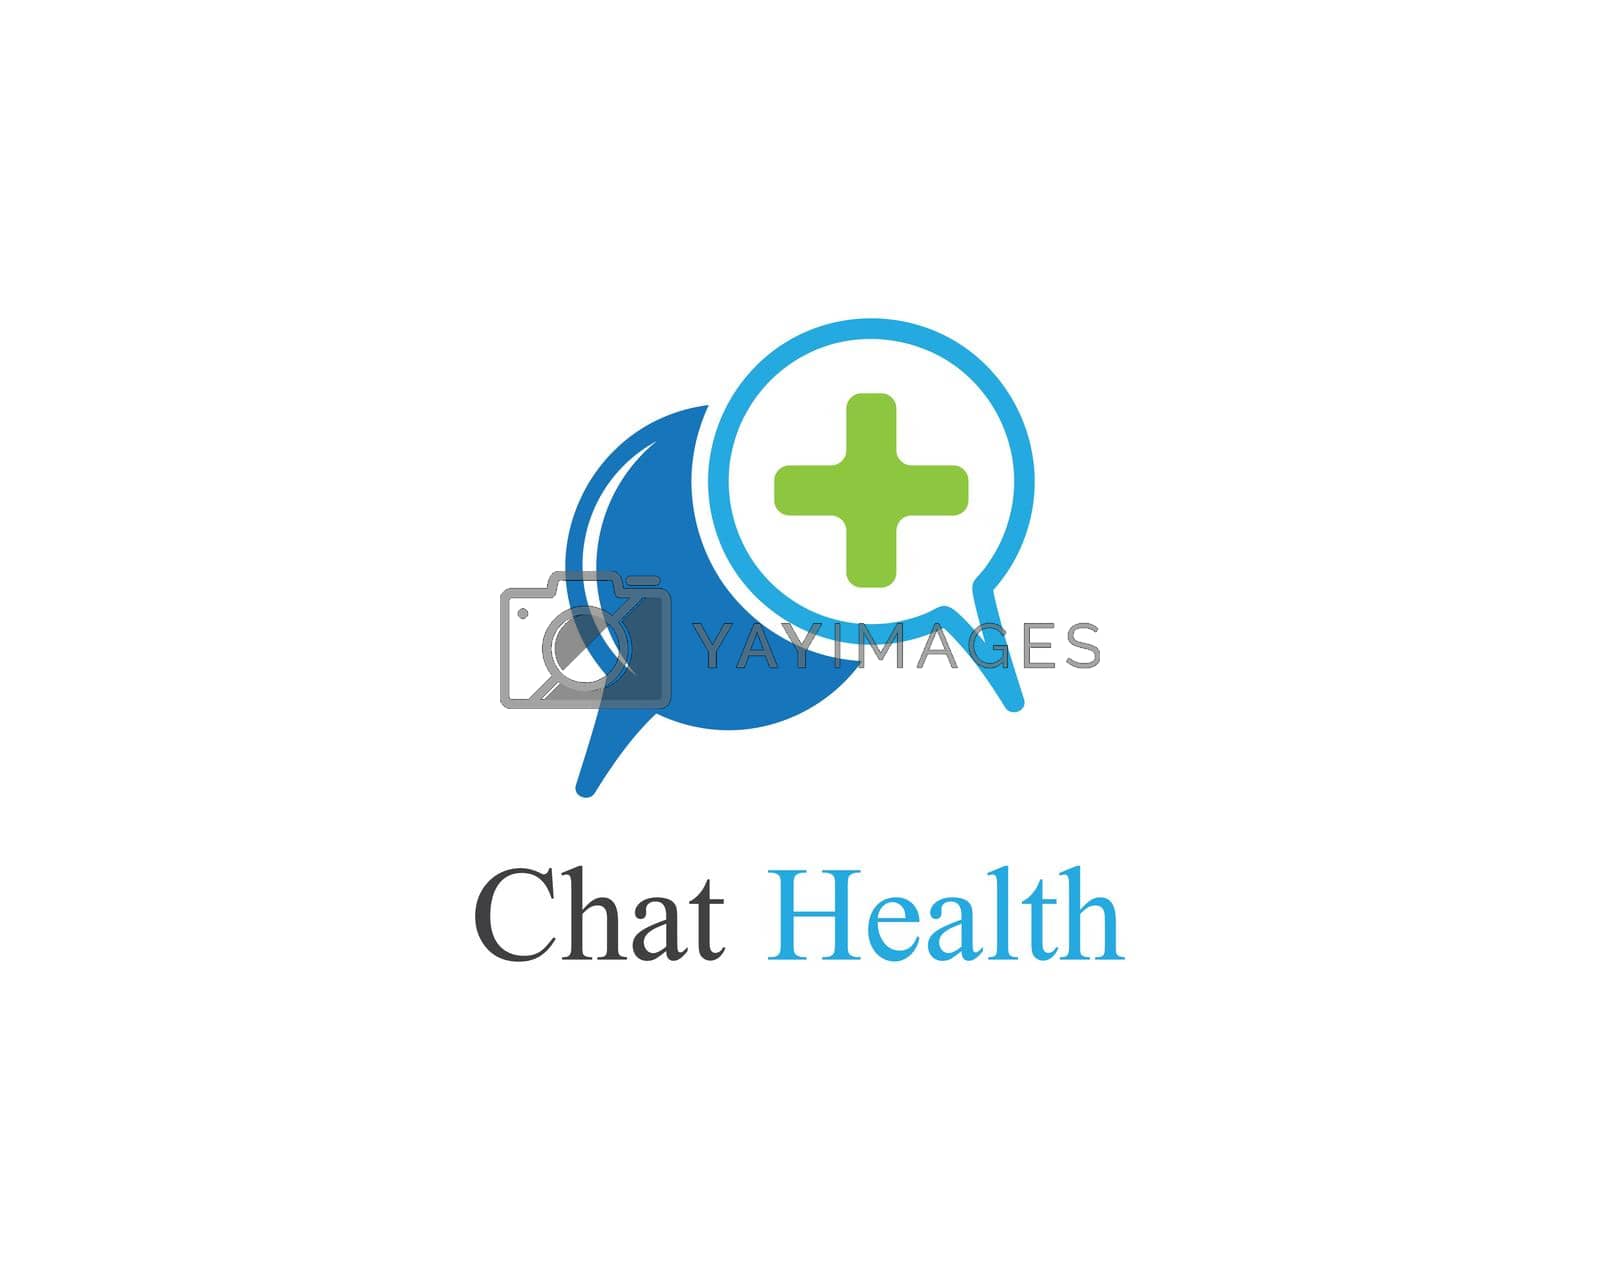 Royalty free image of Chat health logo illustration by Attades19